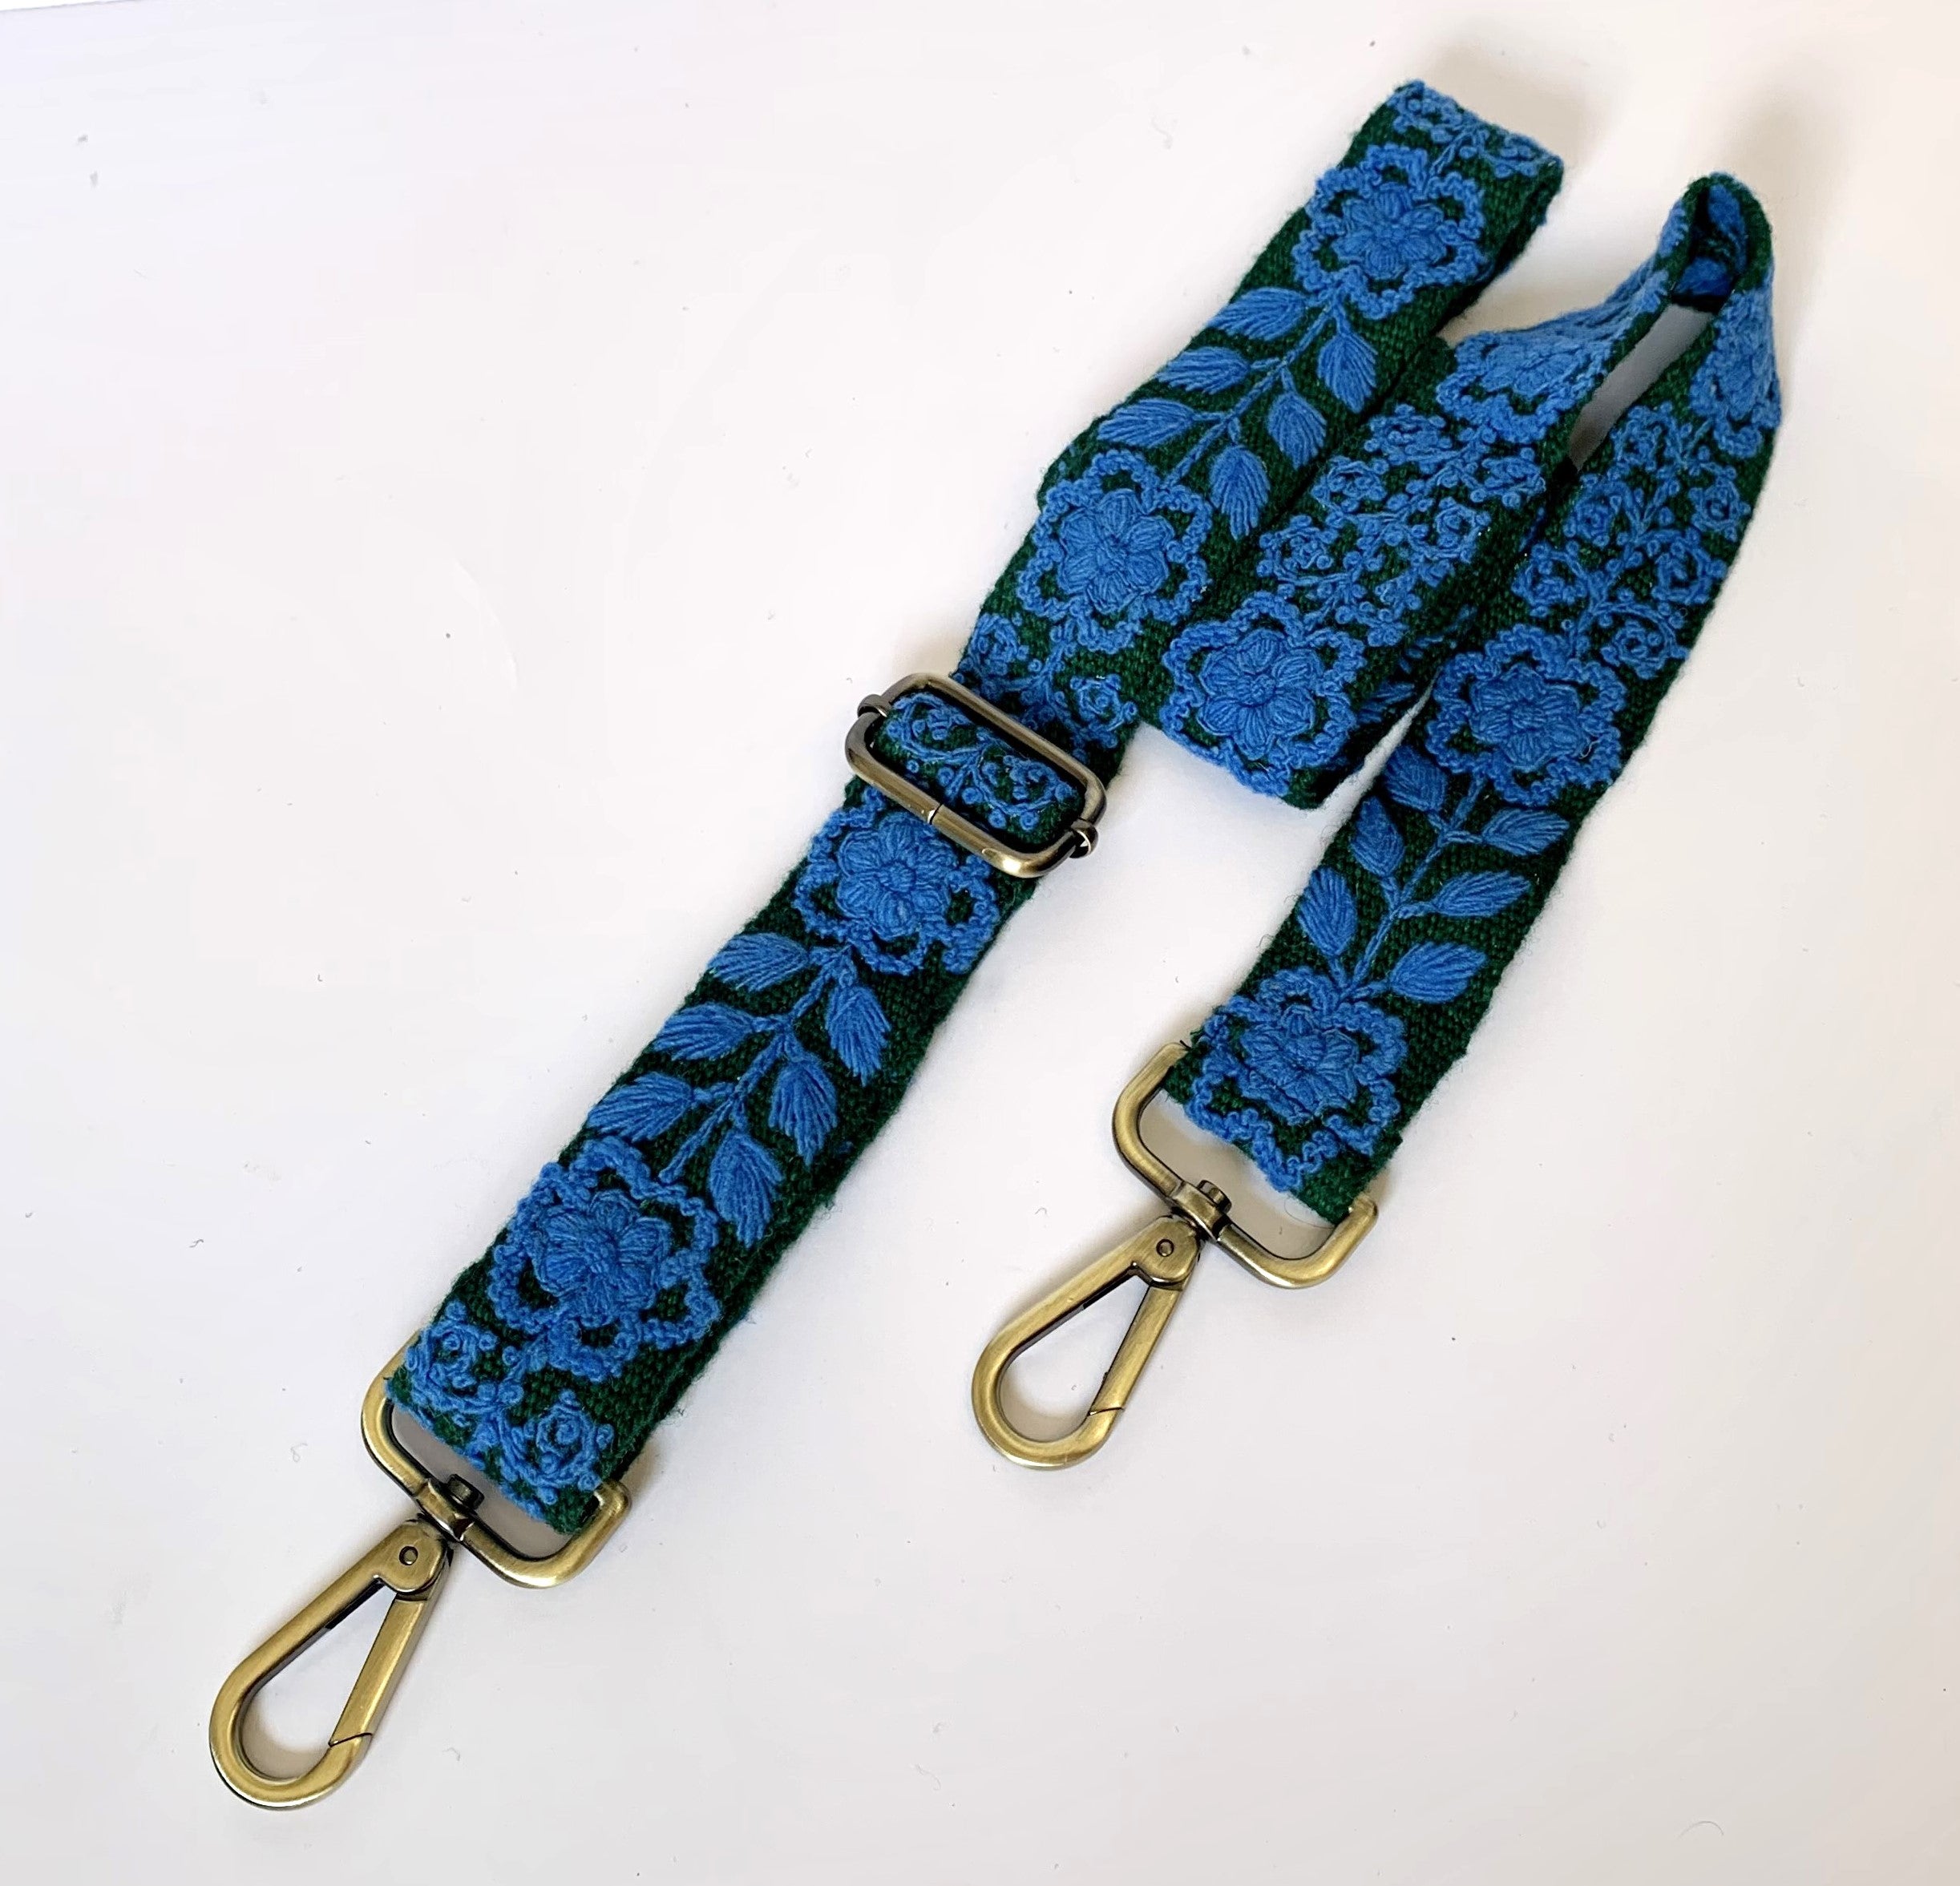 Green and blue adjustable purse strap with metal hooks and clasps